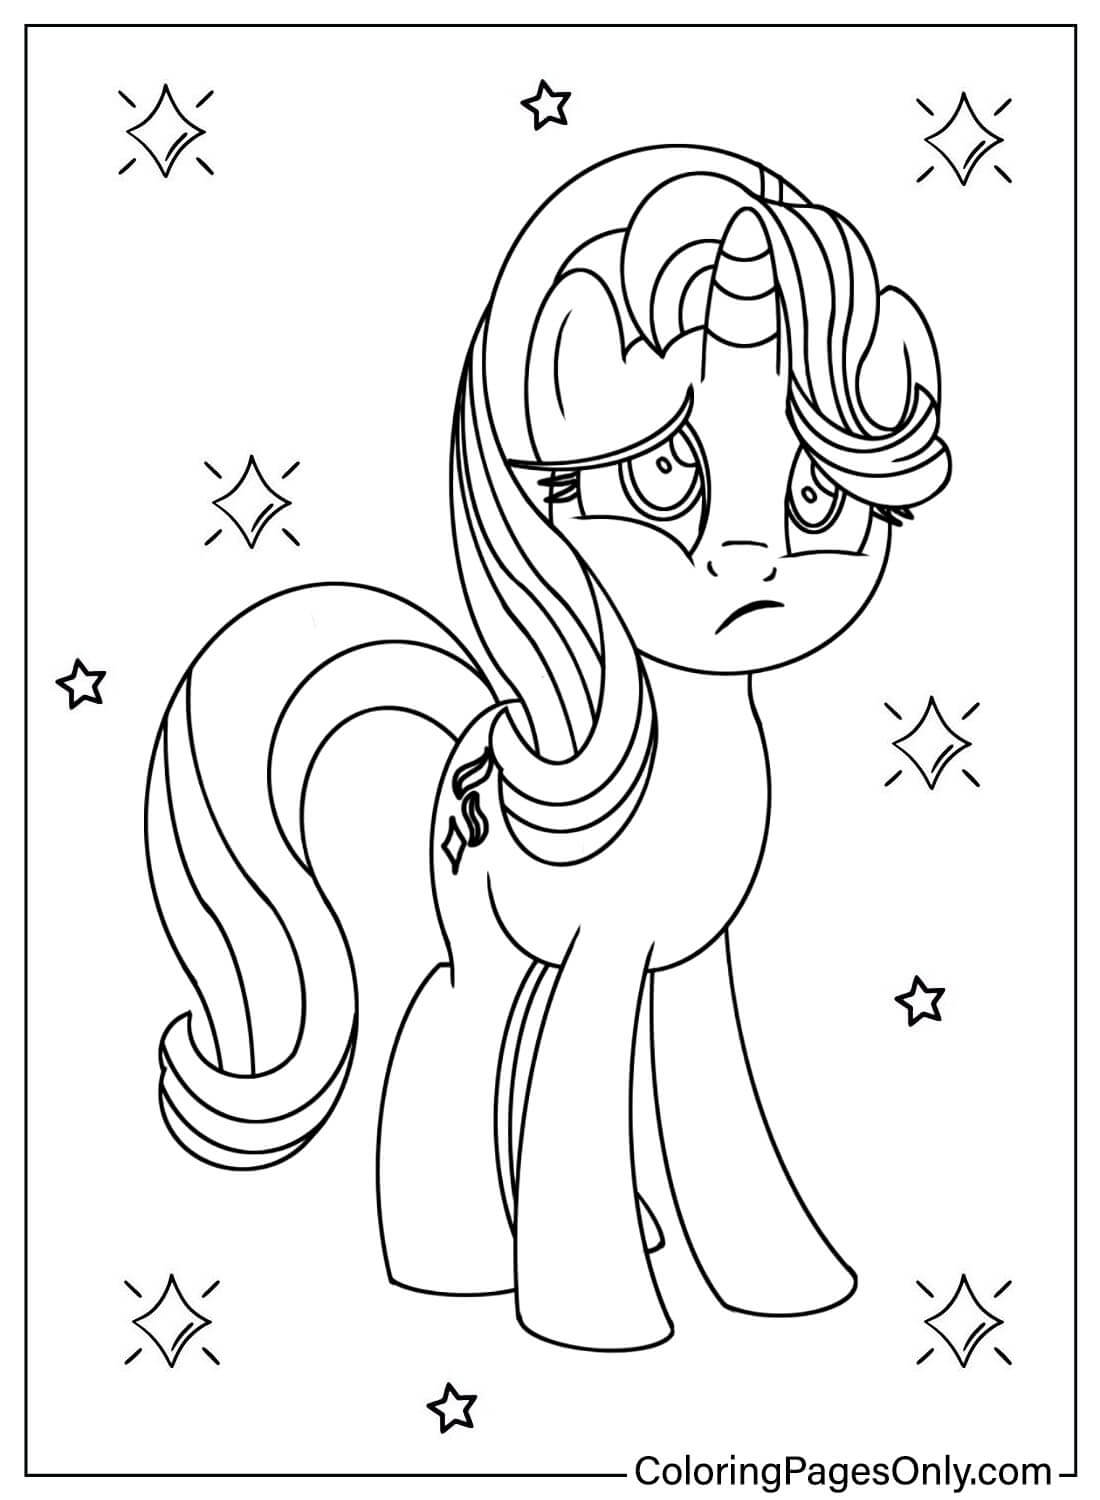 Starlight Glimmer My Little Pony Coloring Page from Starlight Glimmer